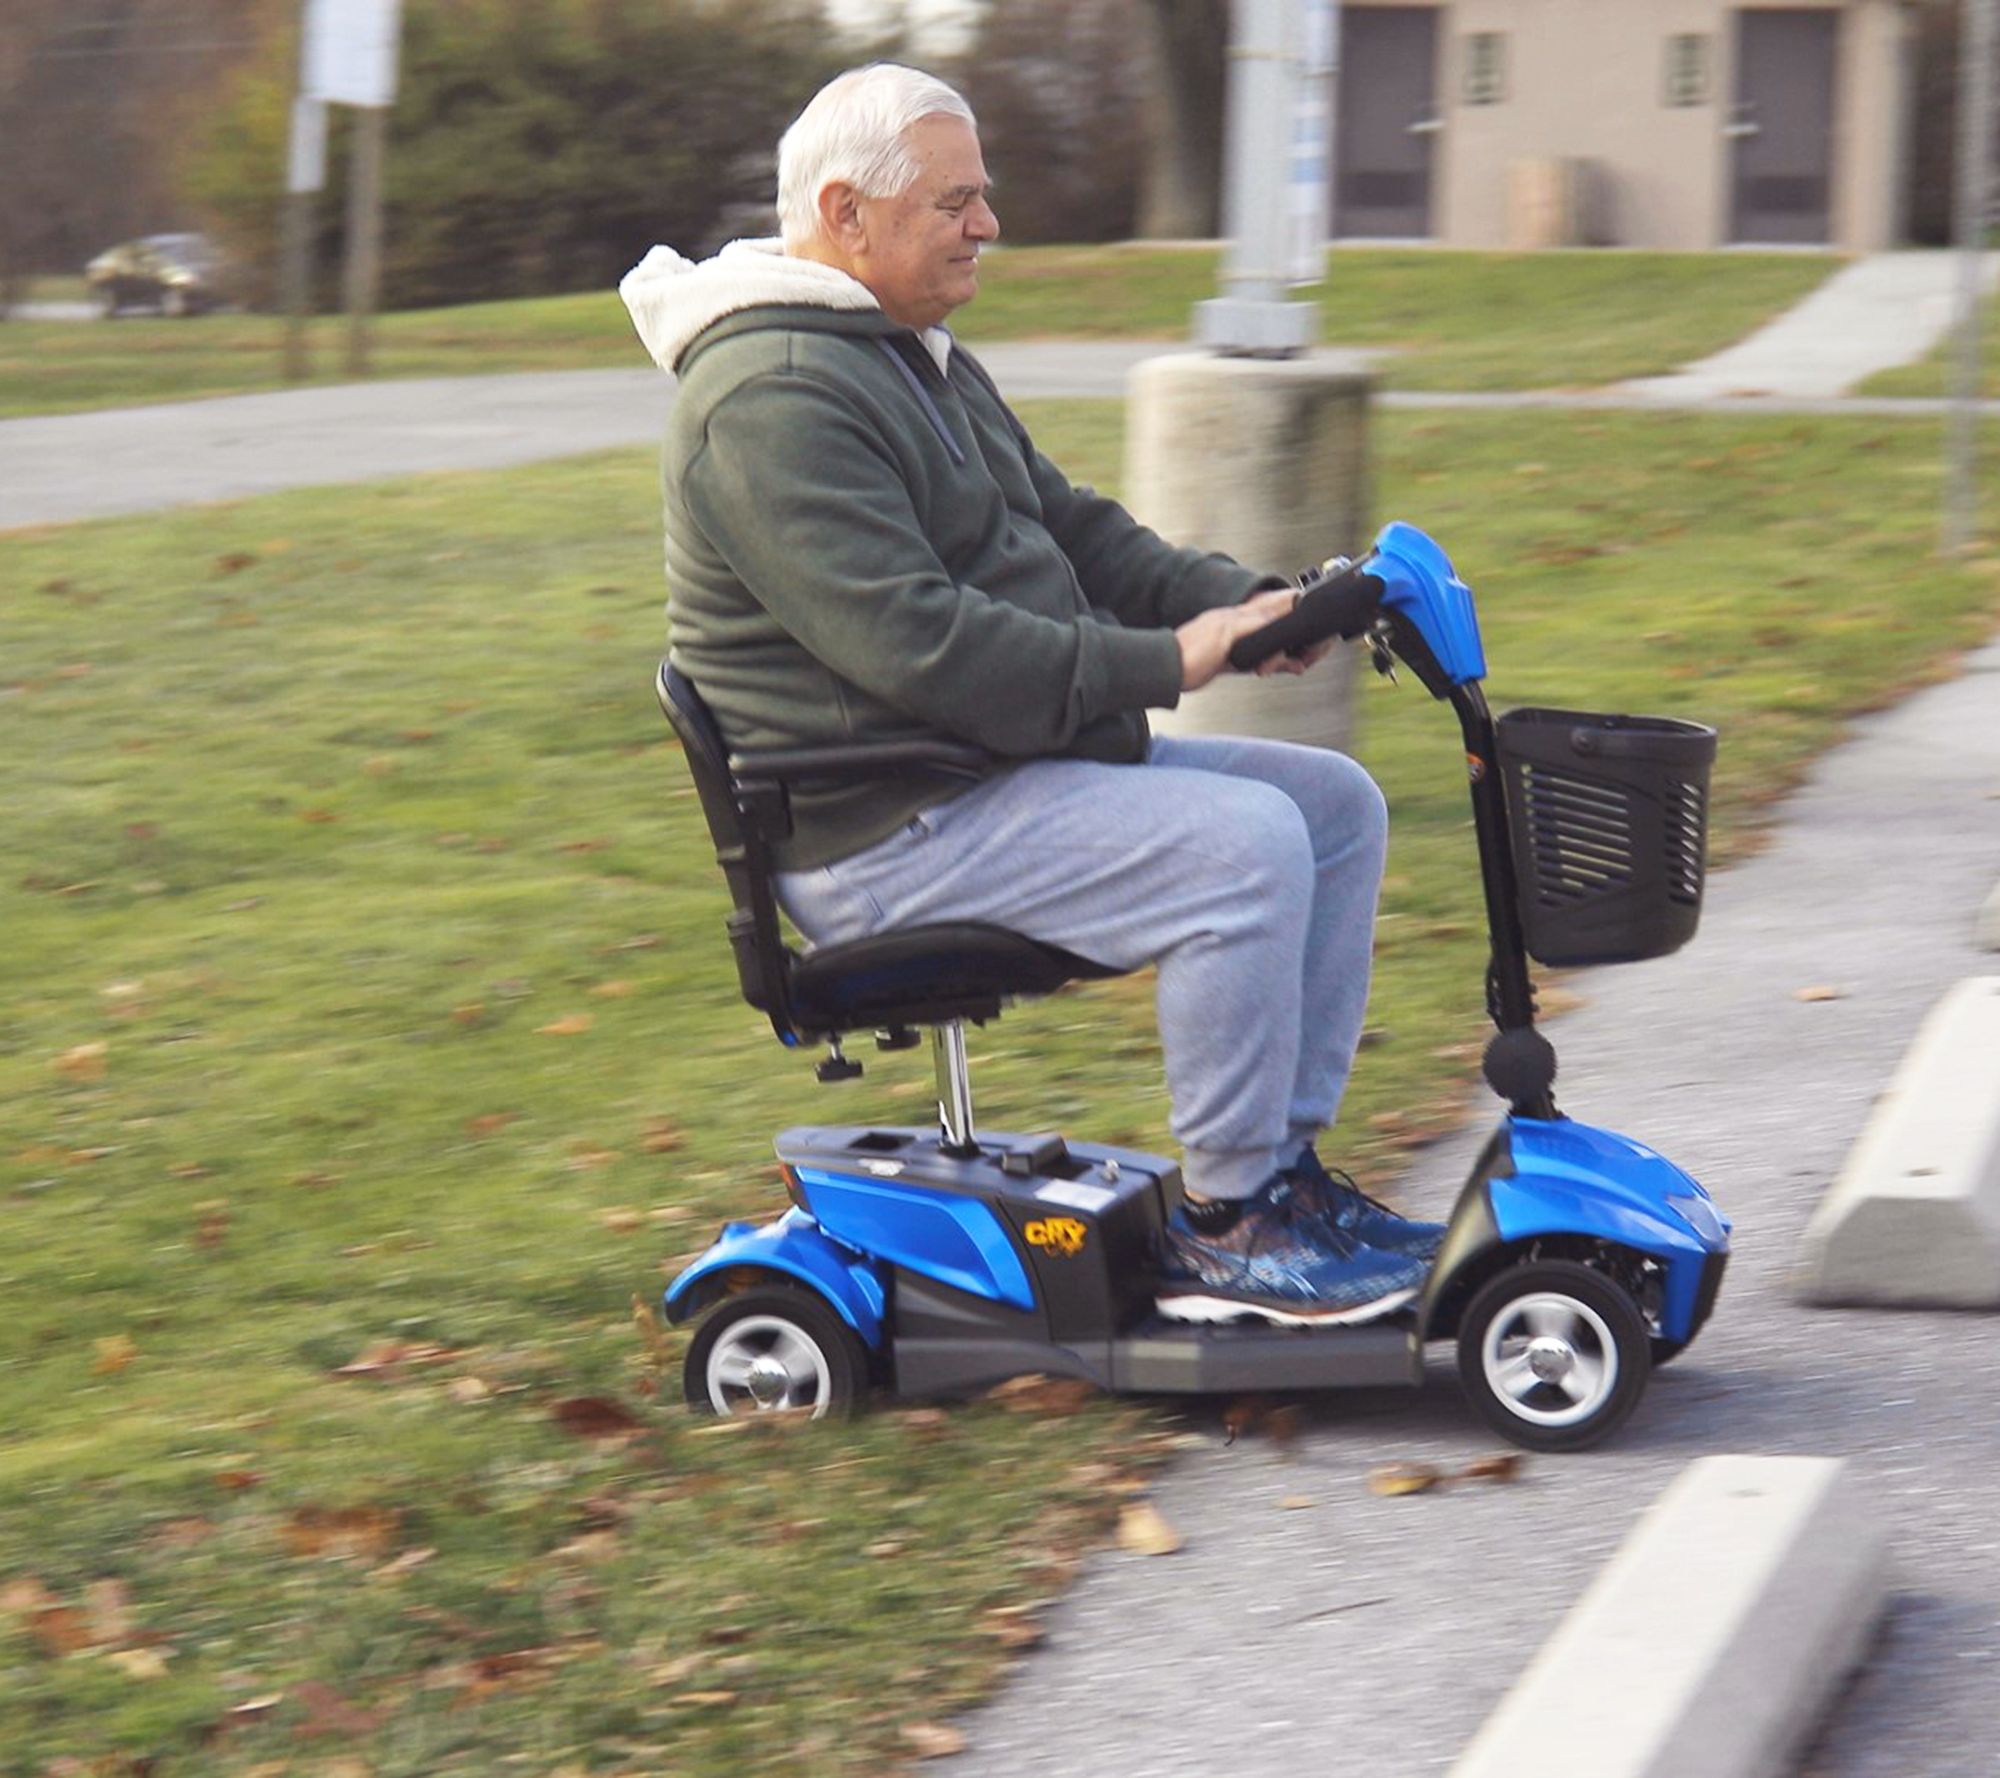 rascal scooter